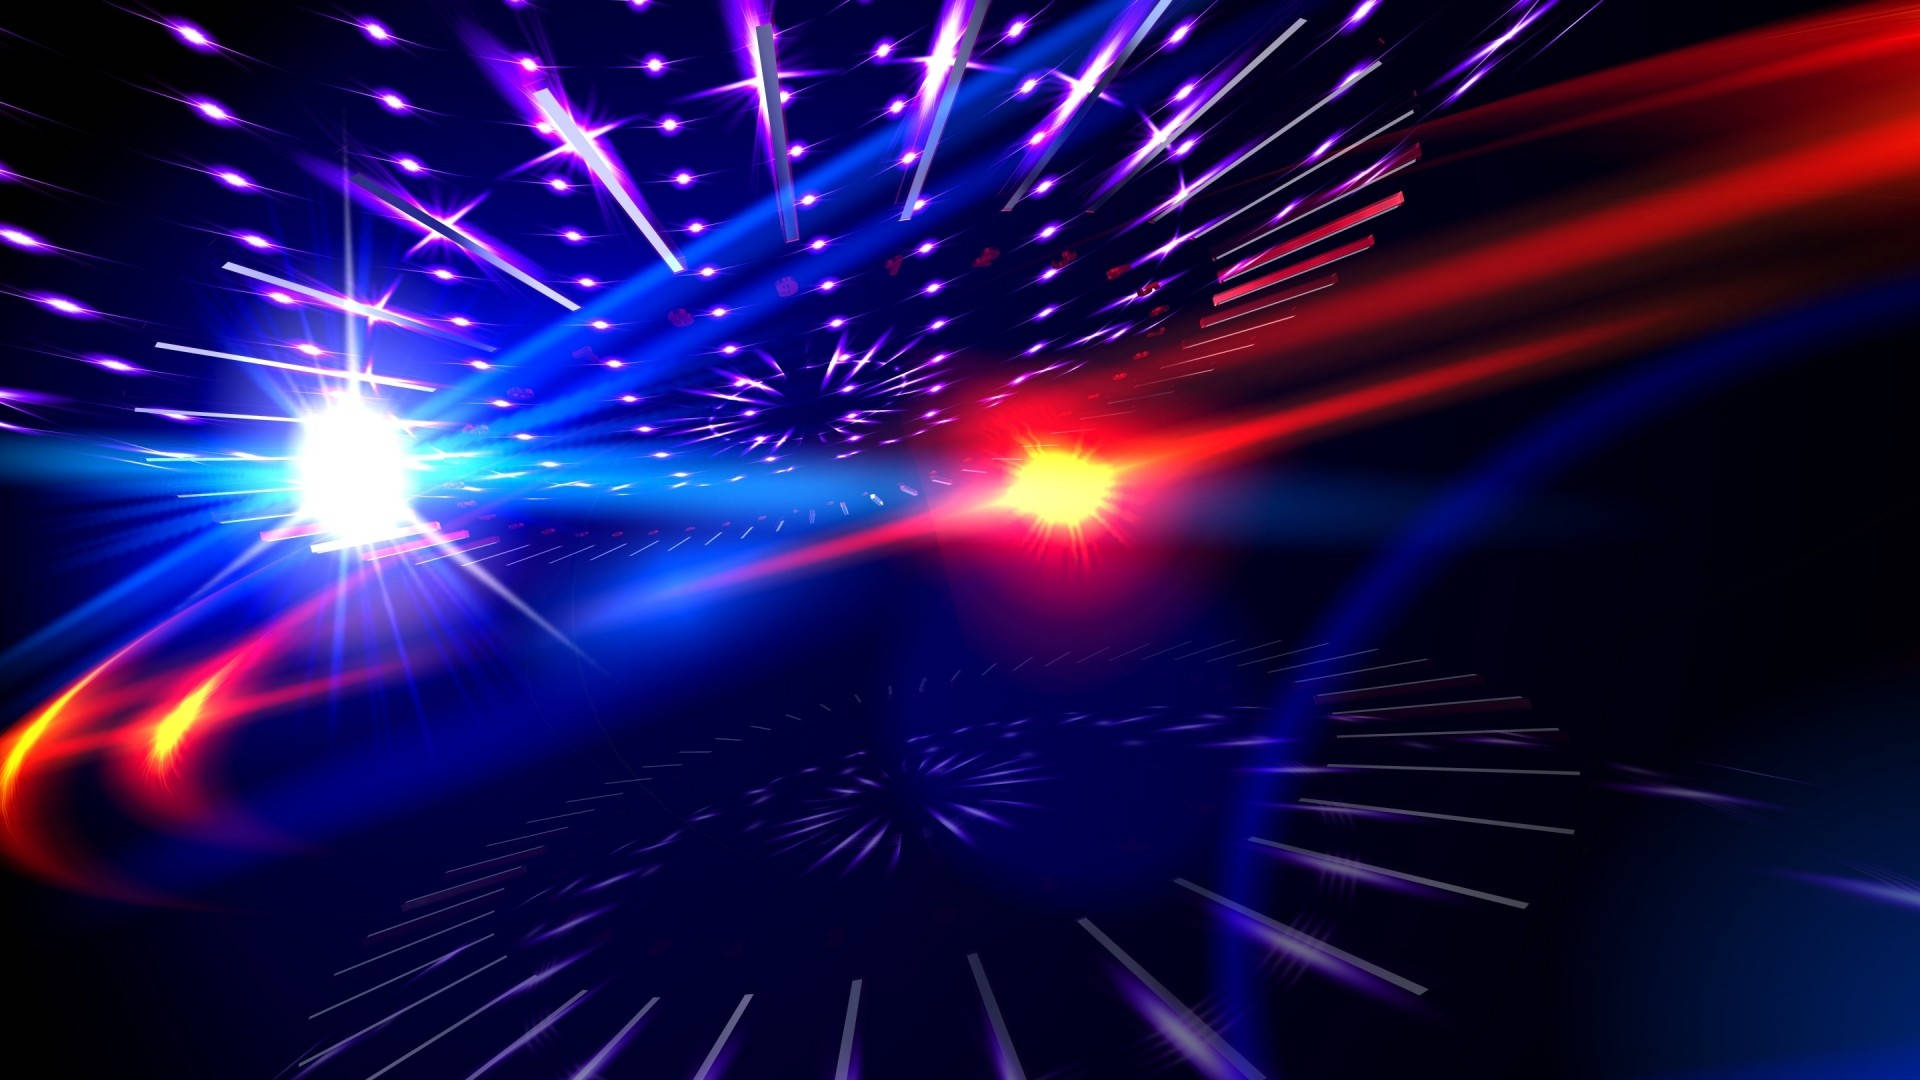 Blue And Red Lights Flare 1080p Hd Desktop